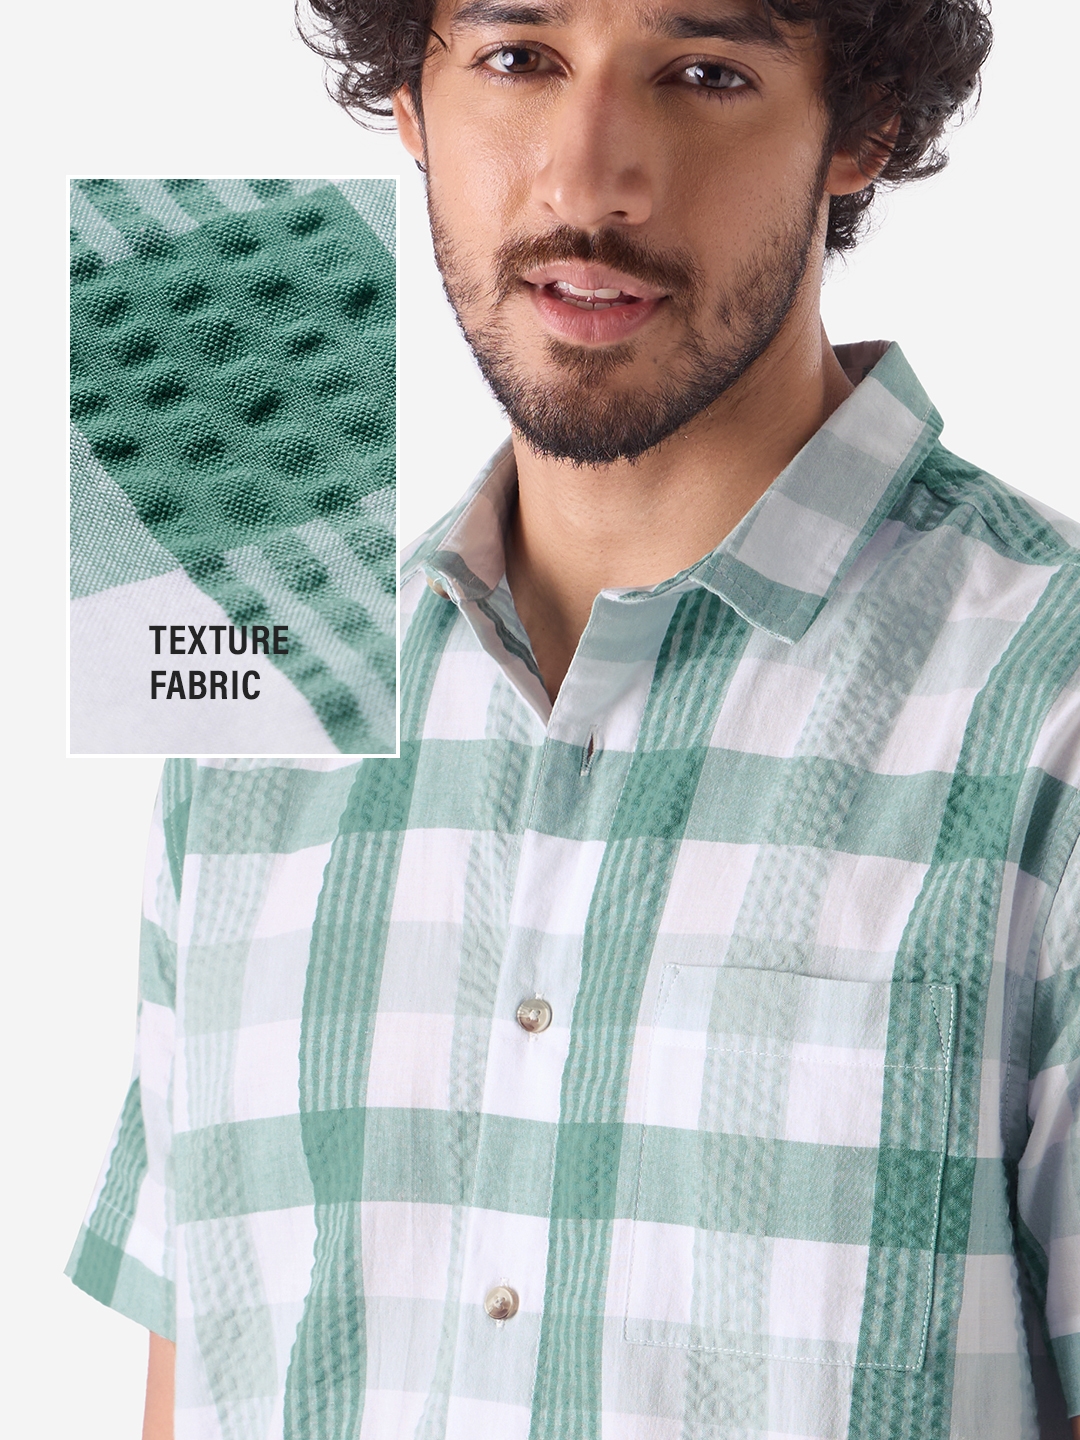 Men's Plaid: White And Green Men's Textured Shirts